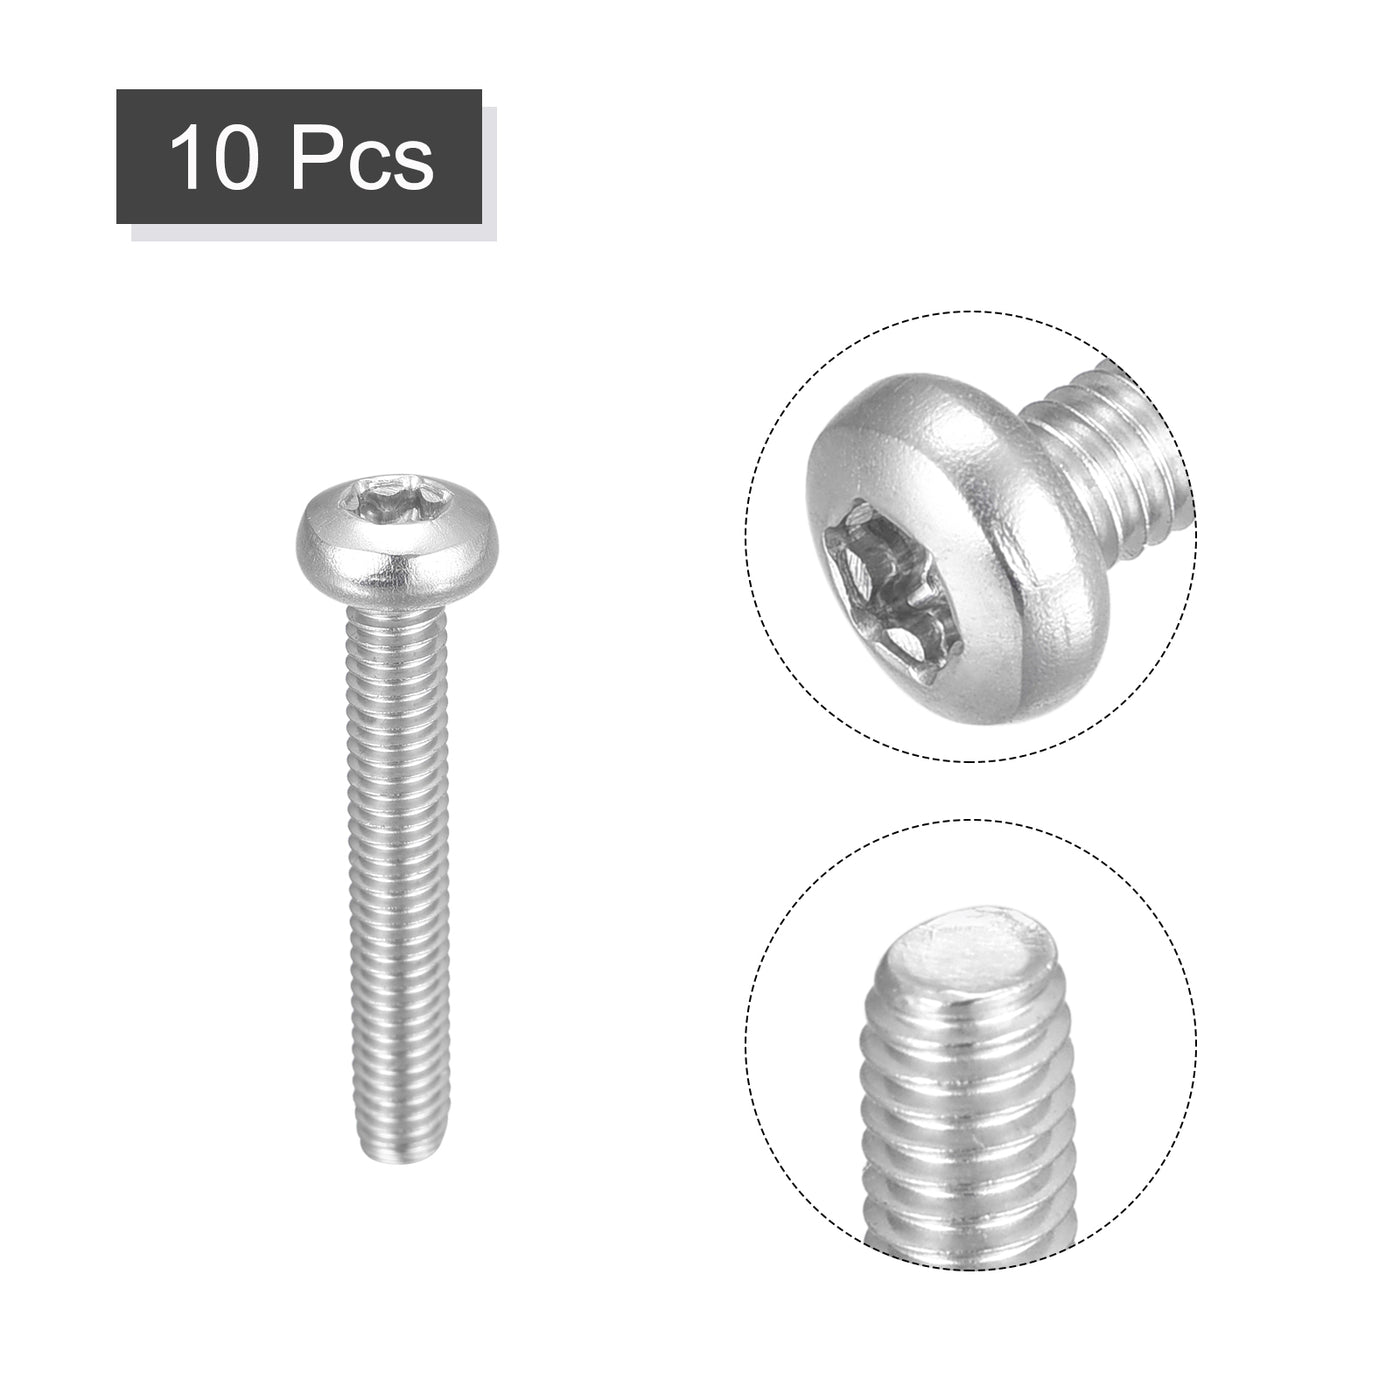 uxcell Uxcell M4x25mm Torx Security Machine Screws, 10pcs 316 Stainless Steel Pan Head Screw